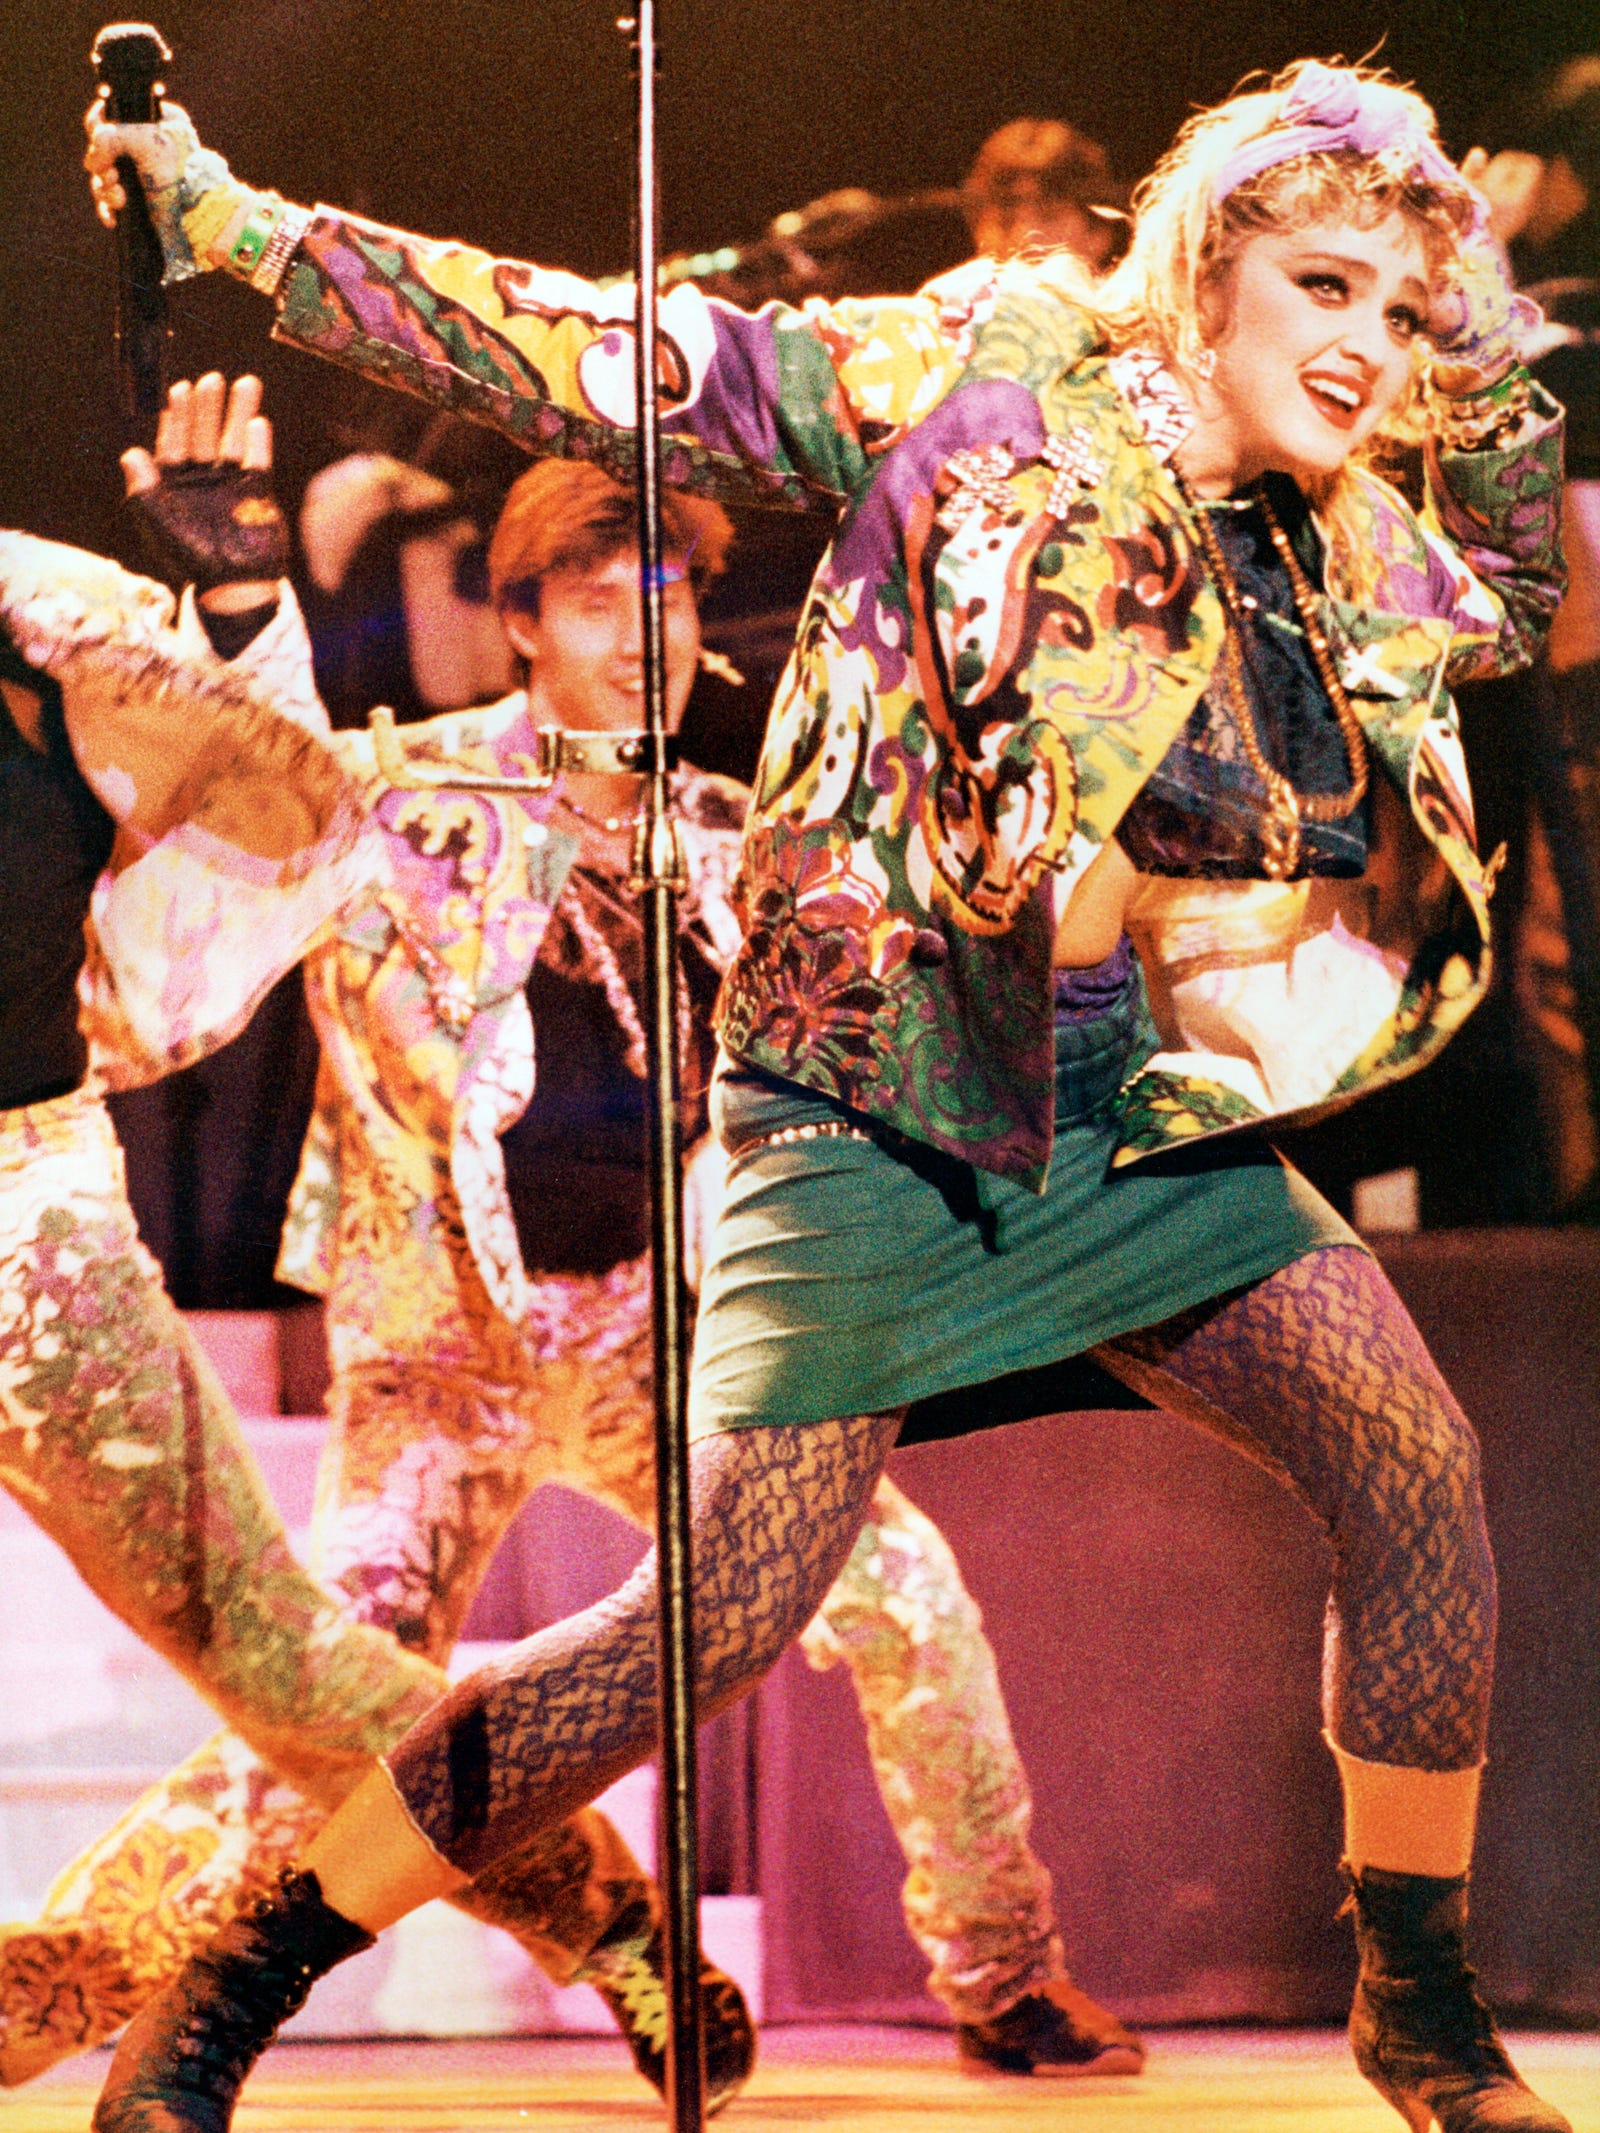 Madonna performs at Cobo Arena during her "Like a Virgin" tour, May 25, 1985. Part of that album was recorded at Cobo.